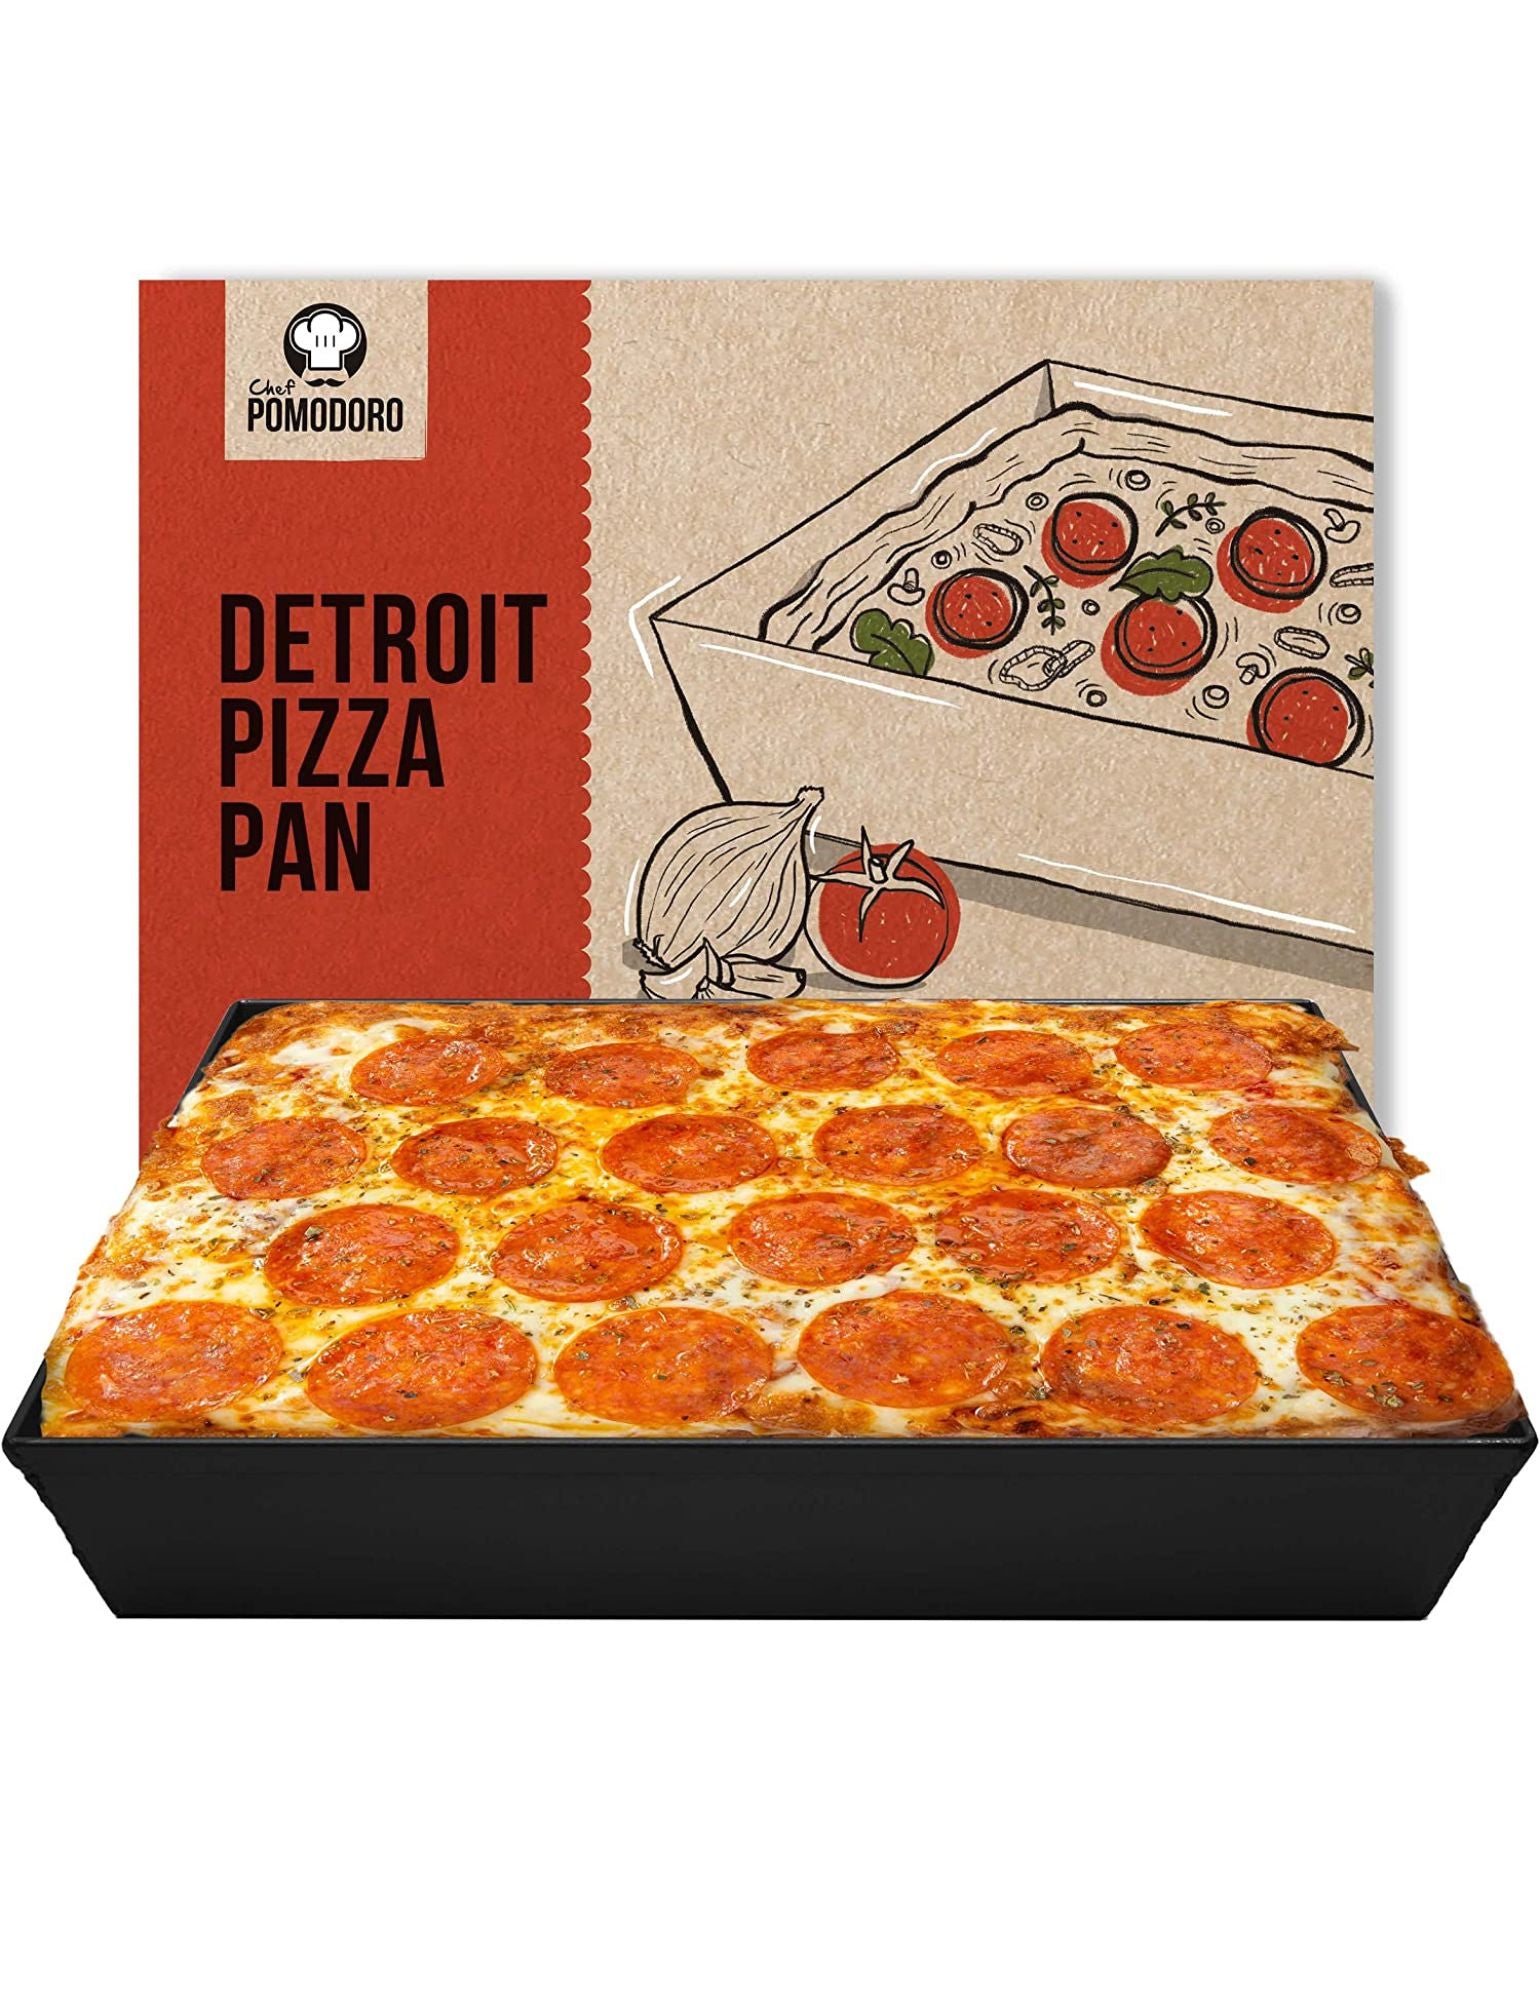 Detroit Style Pizza Pans (Non Stick Two-Year Warranty) 10 x 14 x 2.5 Inch  Sicilian Style Pizza Pan, Hard Anodized Deep Dish Square Grandma Style  Pizza